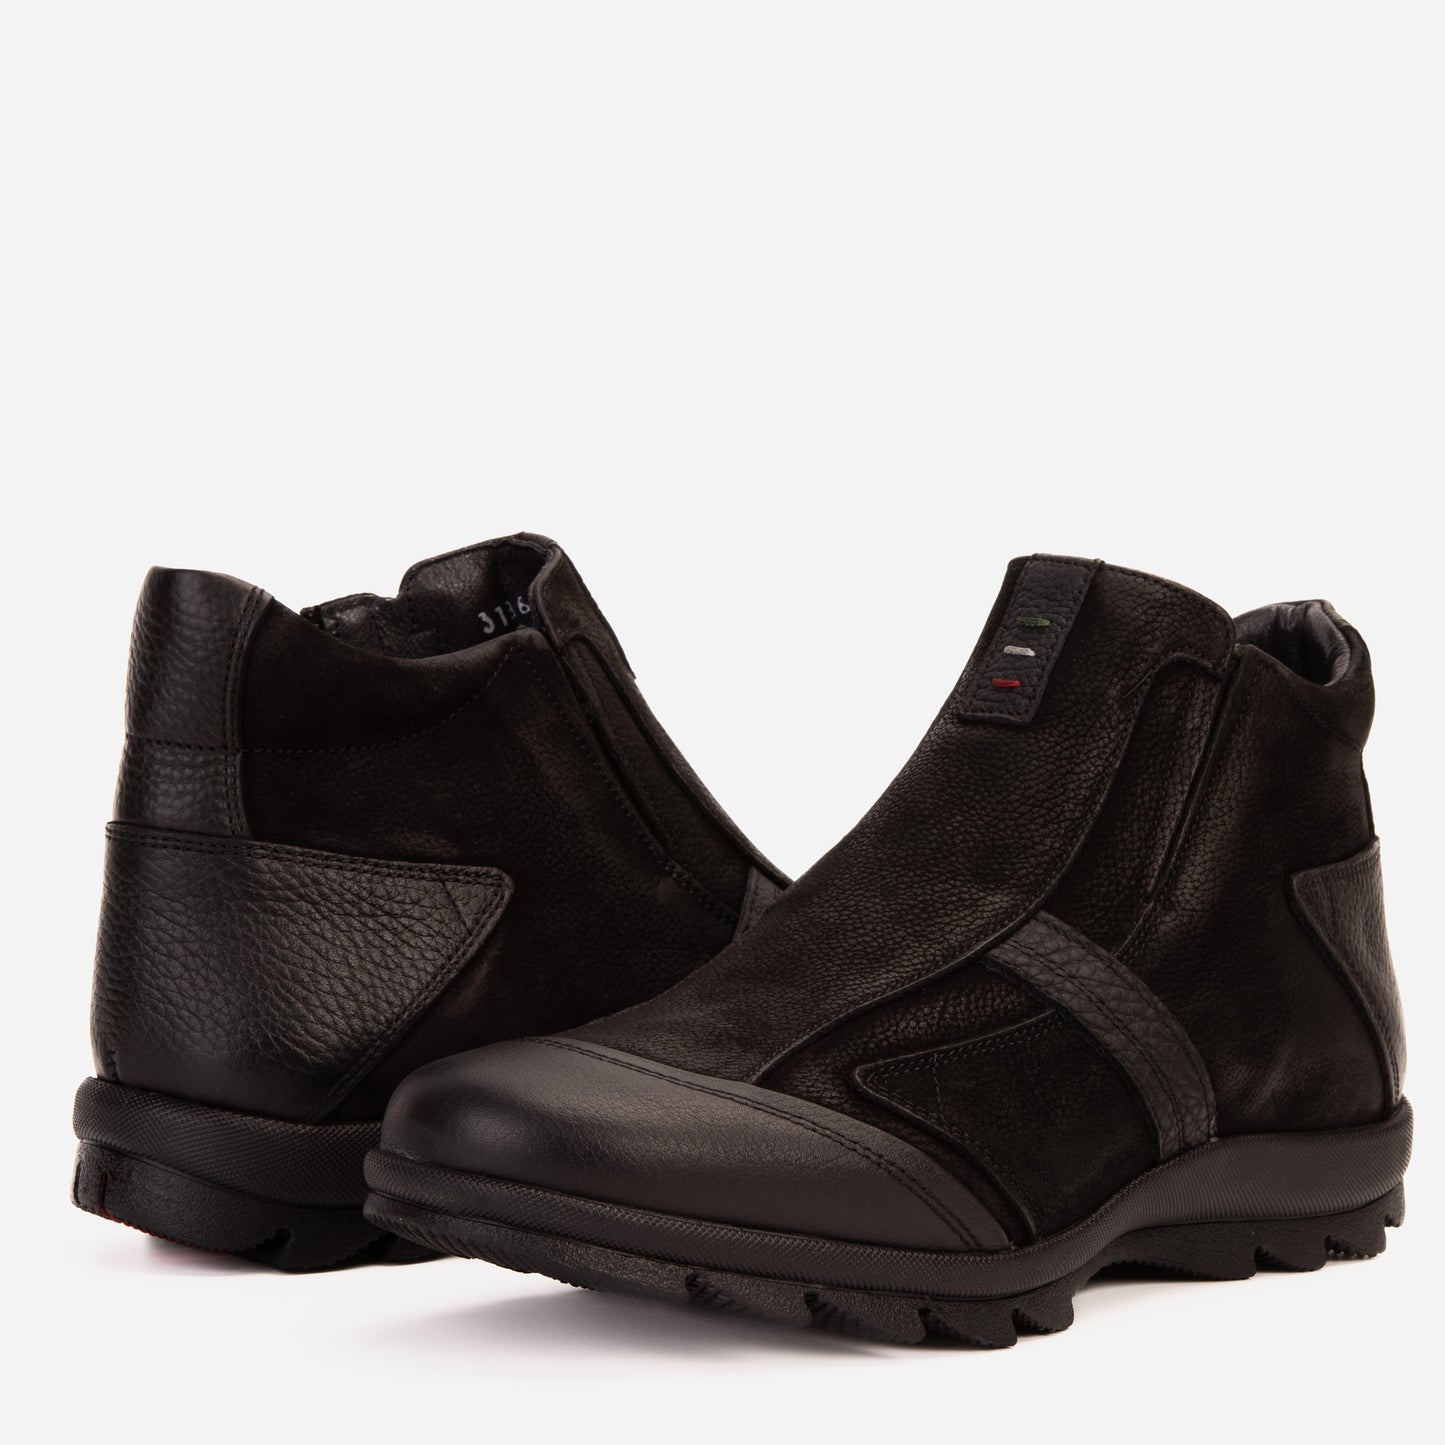 The Montreal Suede Black Leather Casual Zip-Up Ankle Men Boot